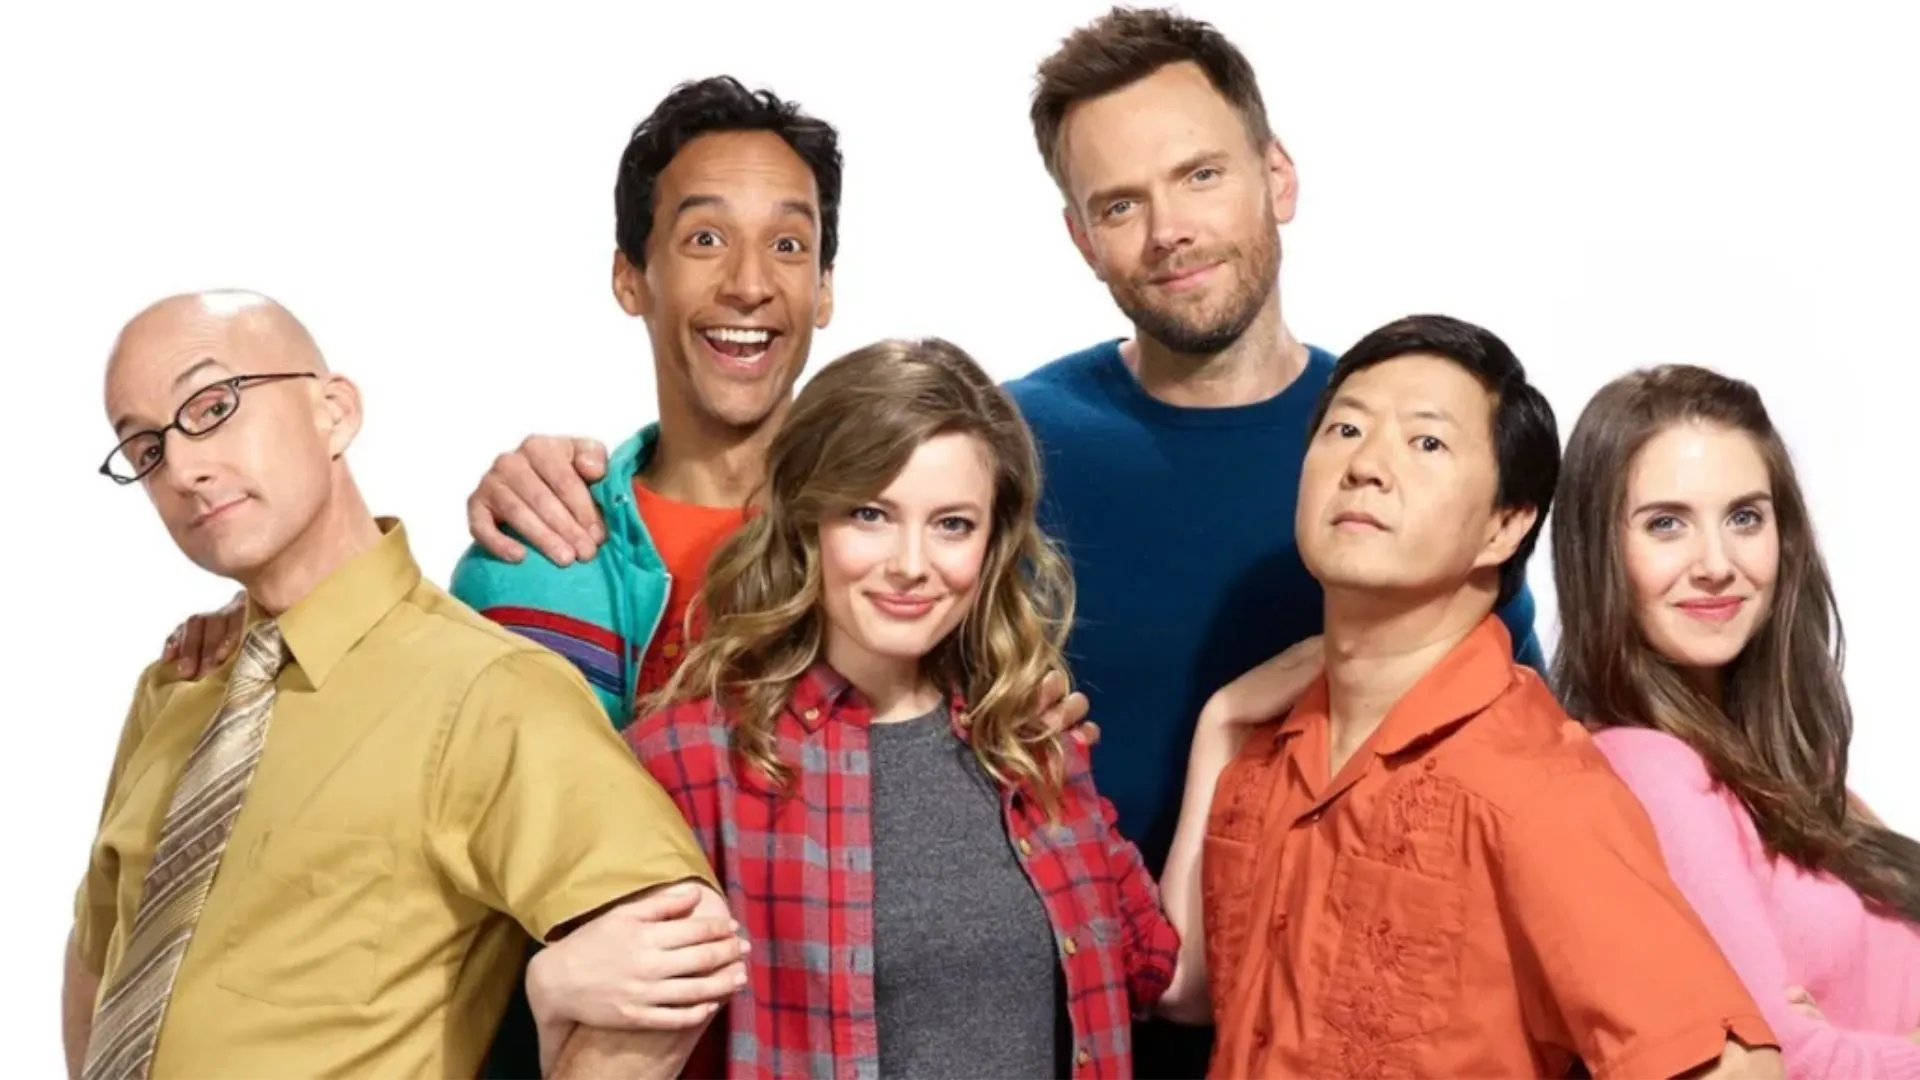 Community The Movie Filming, Release Date, Cast, Plotline